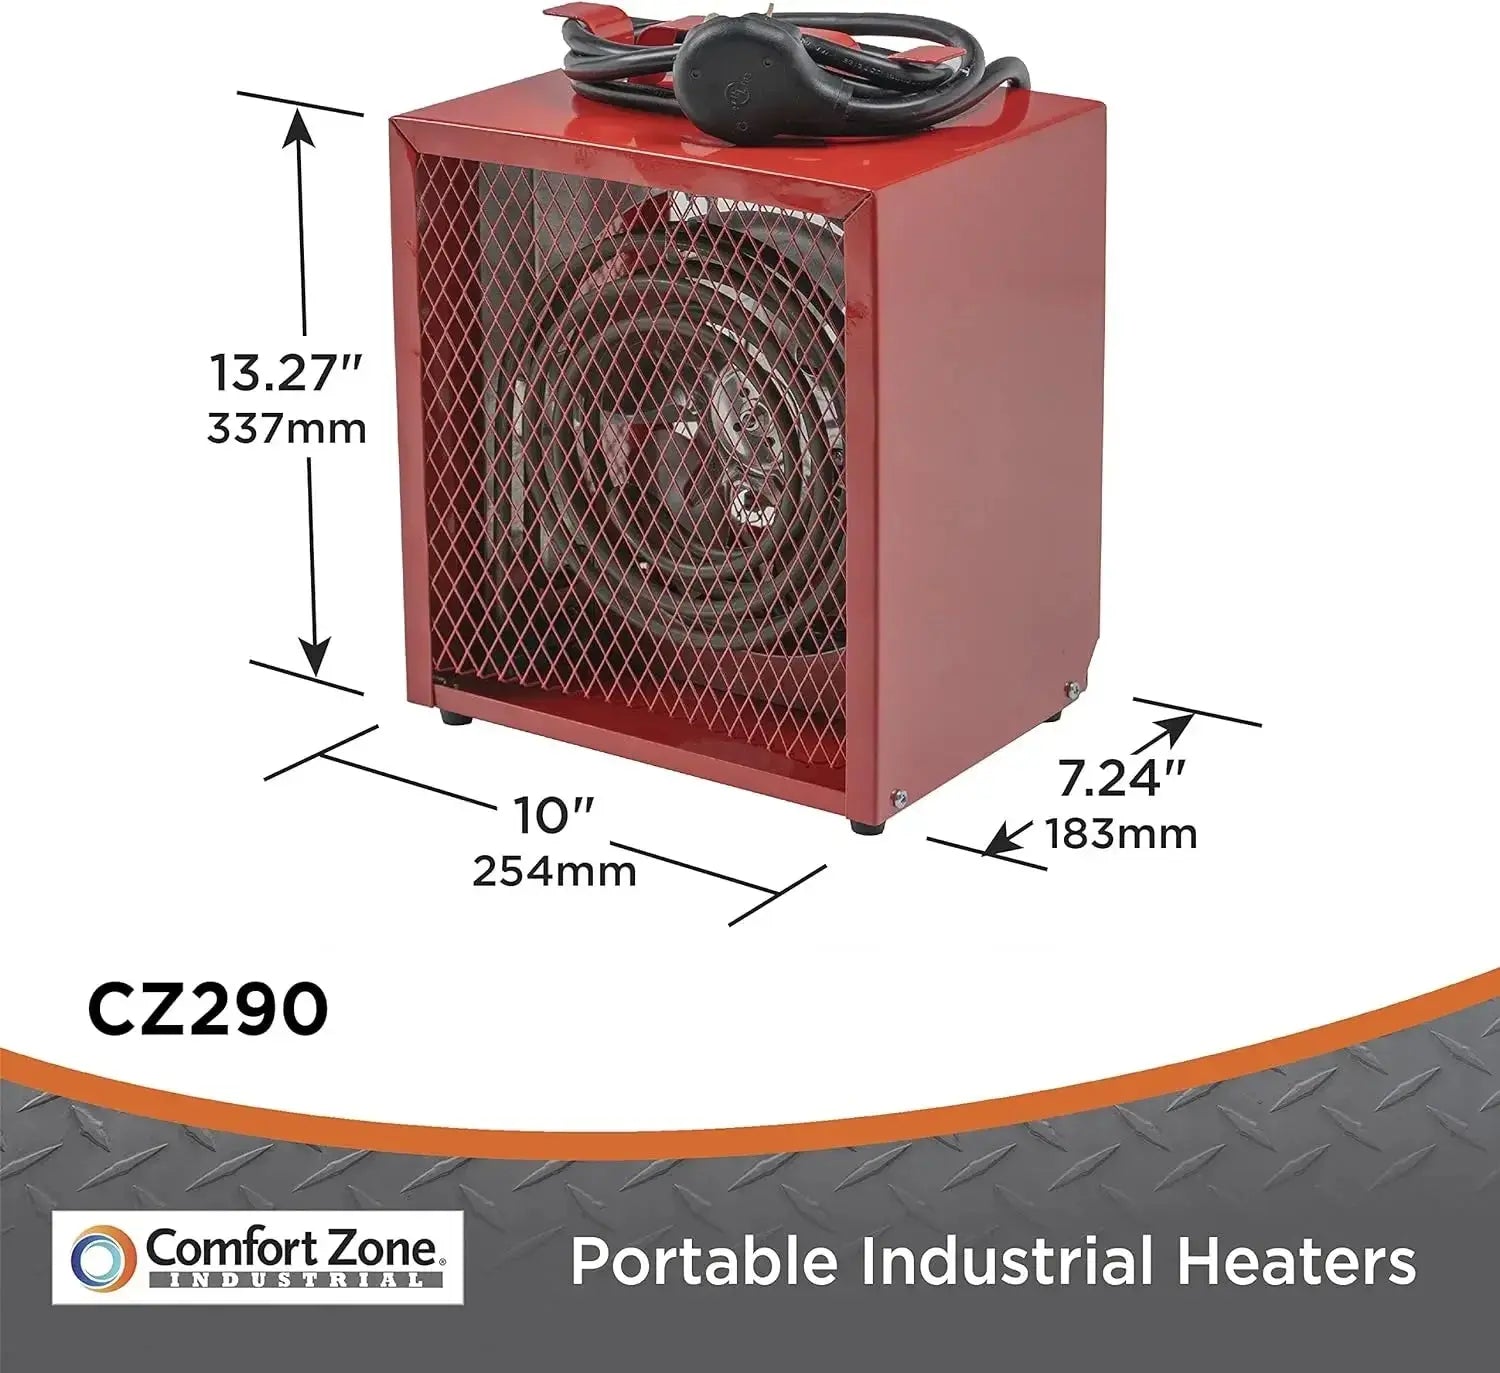 Electric Space Heater 4800W Steel with Thermostat Control Carry Handle My Store